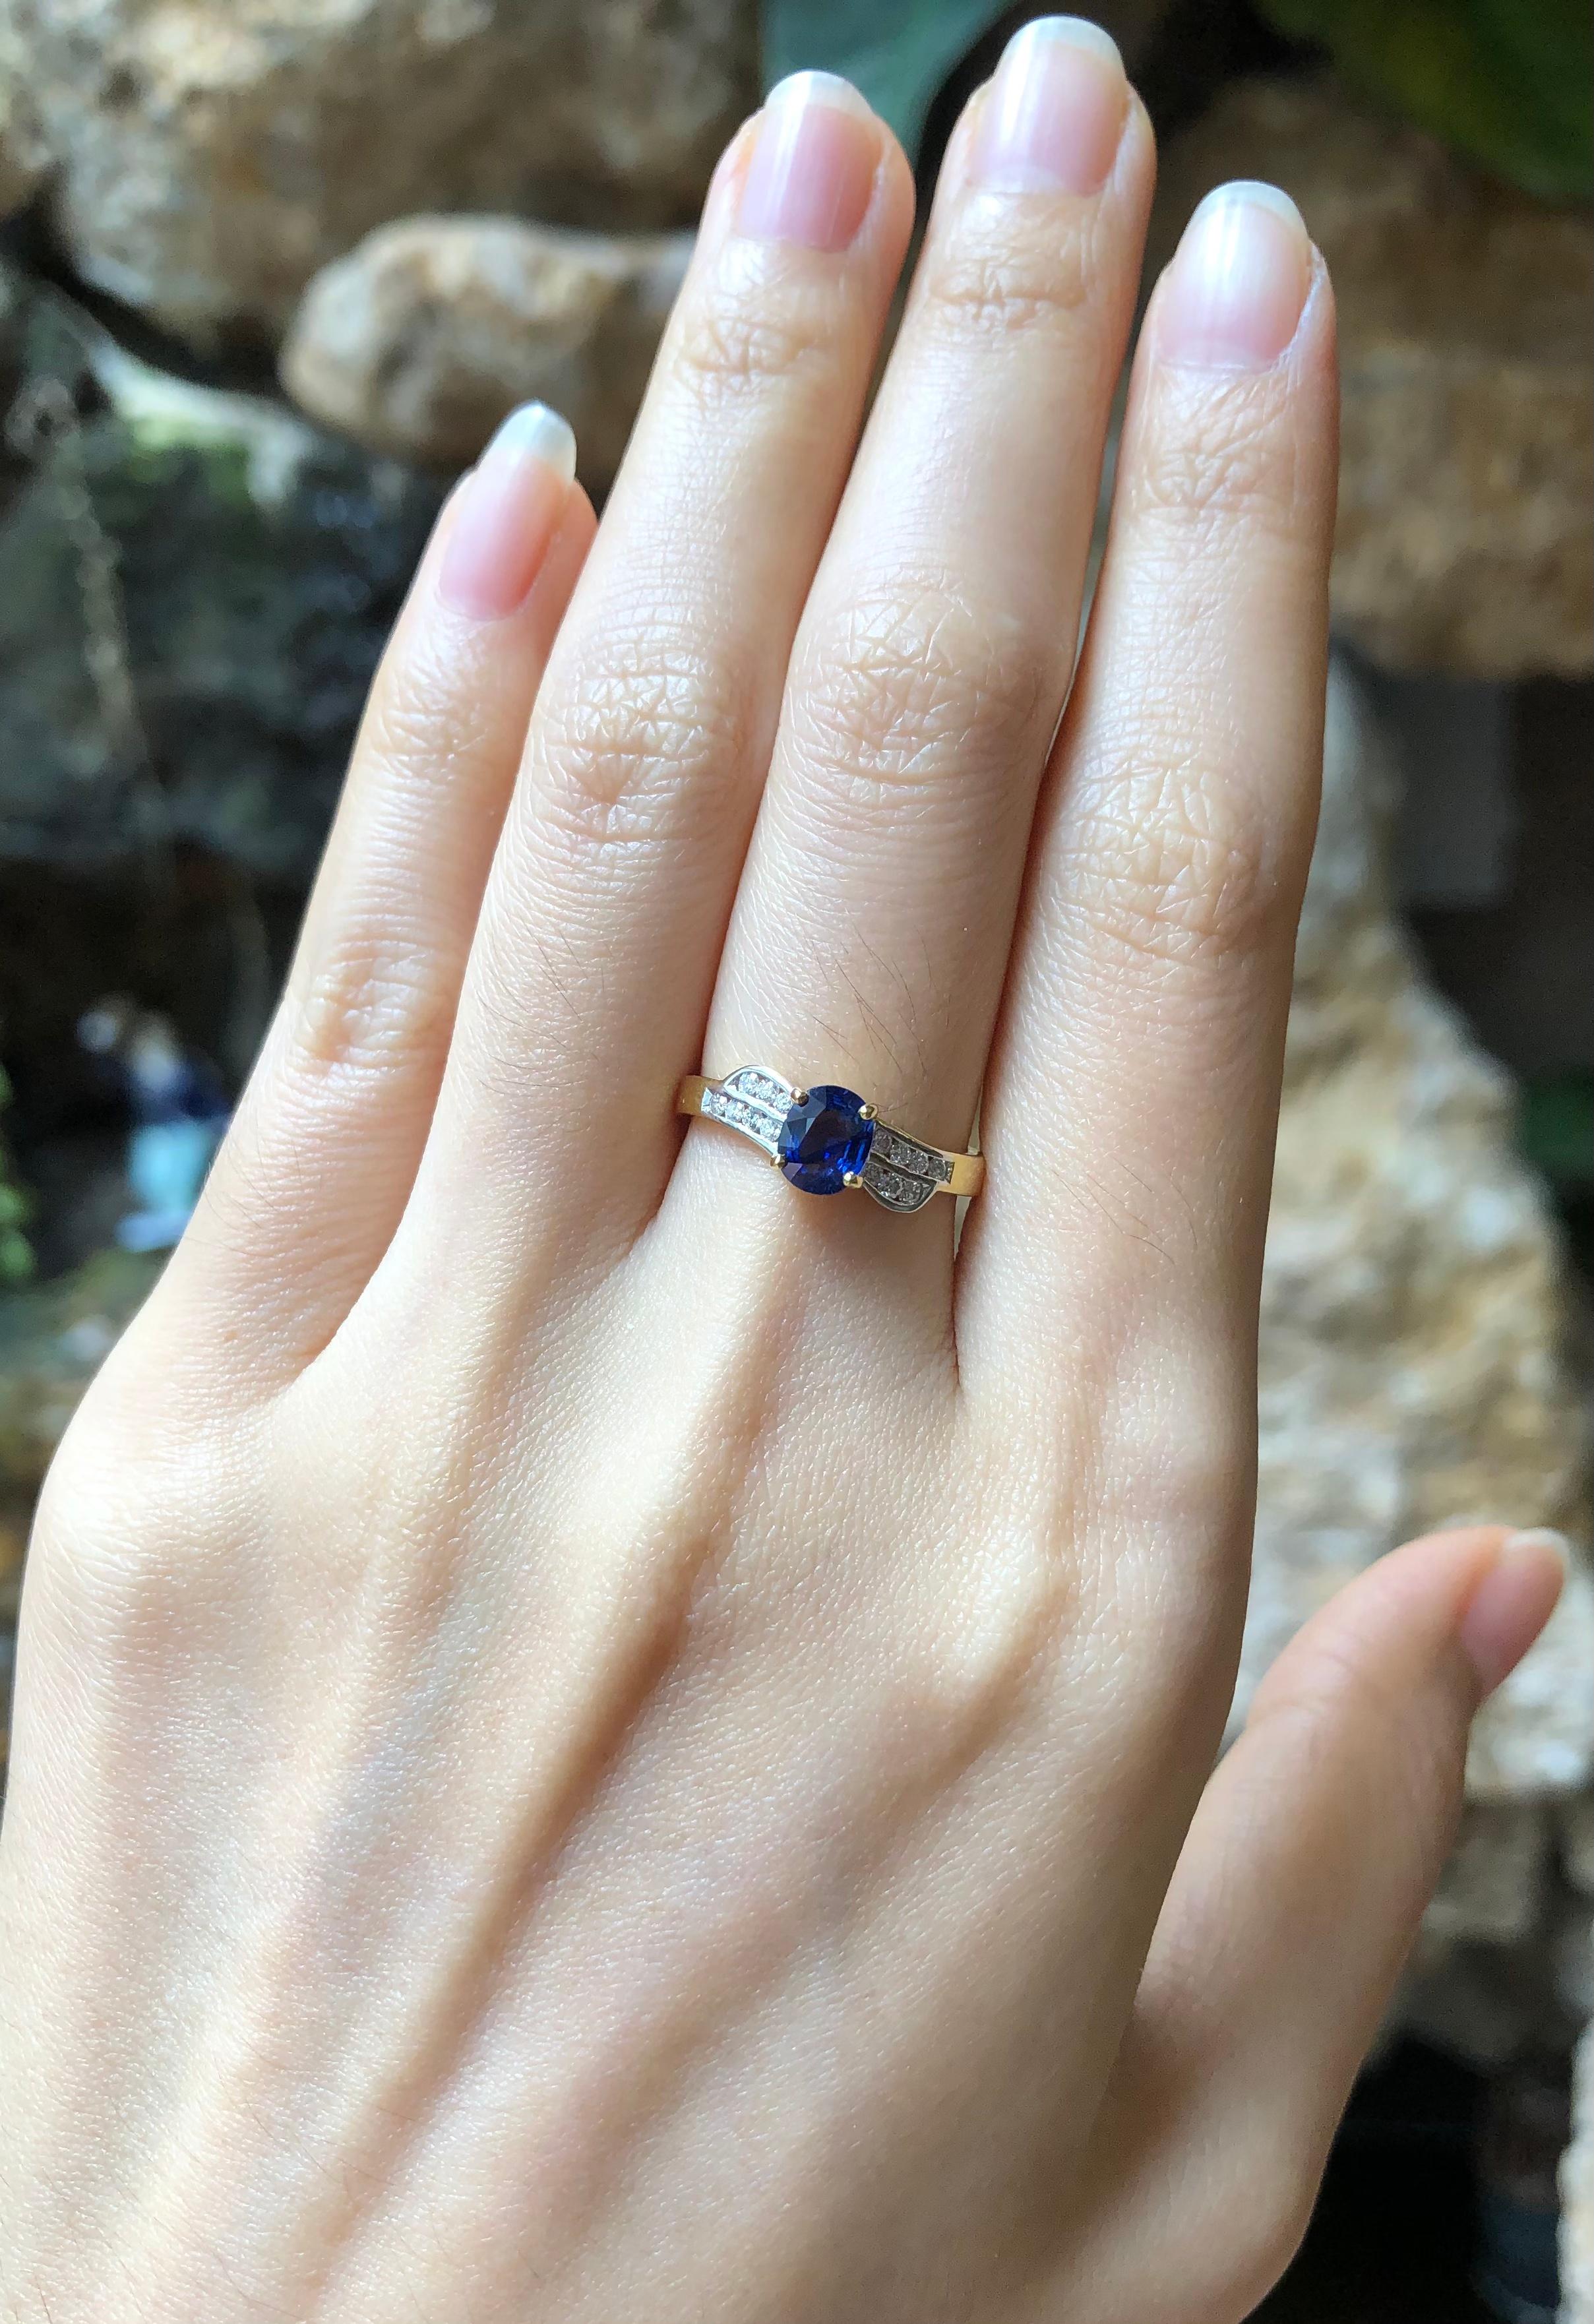 Blue Sapphire 0.74 carat with Diamond 0.16 carat Ring set in 18 Karat Gold Settings

Width:  0.5 cm 
Length: 0.6 cm
Ring Size: 51
Total Weight: 2.73 grams

